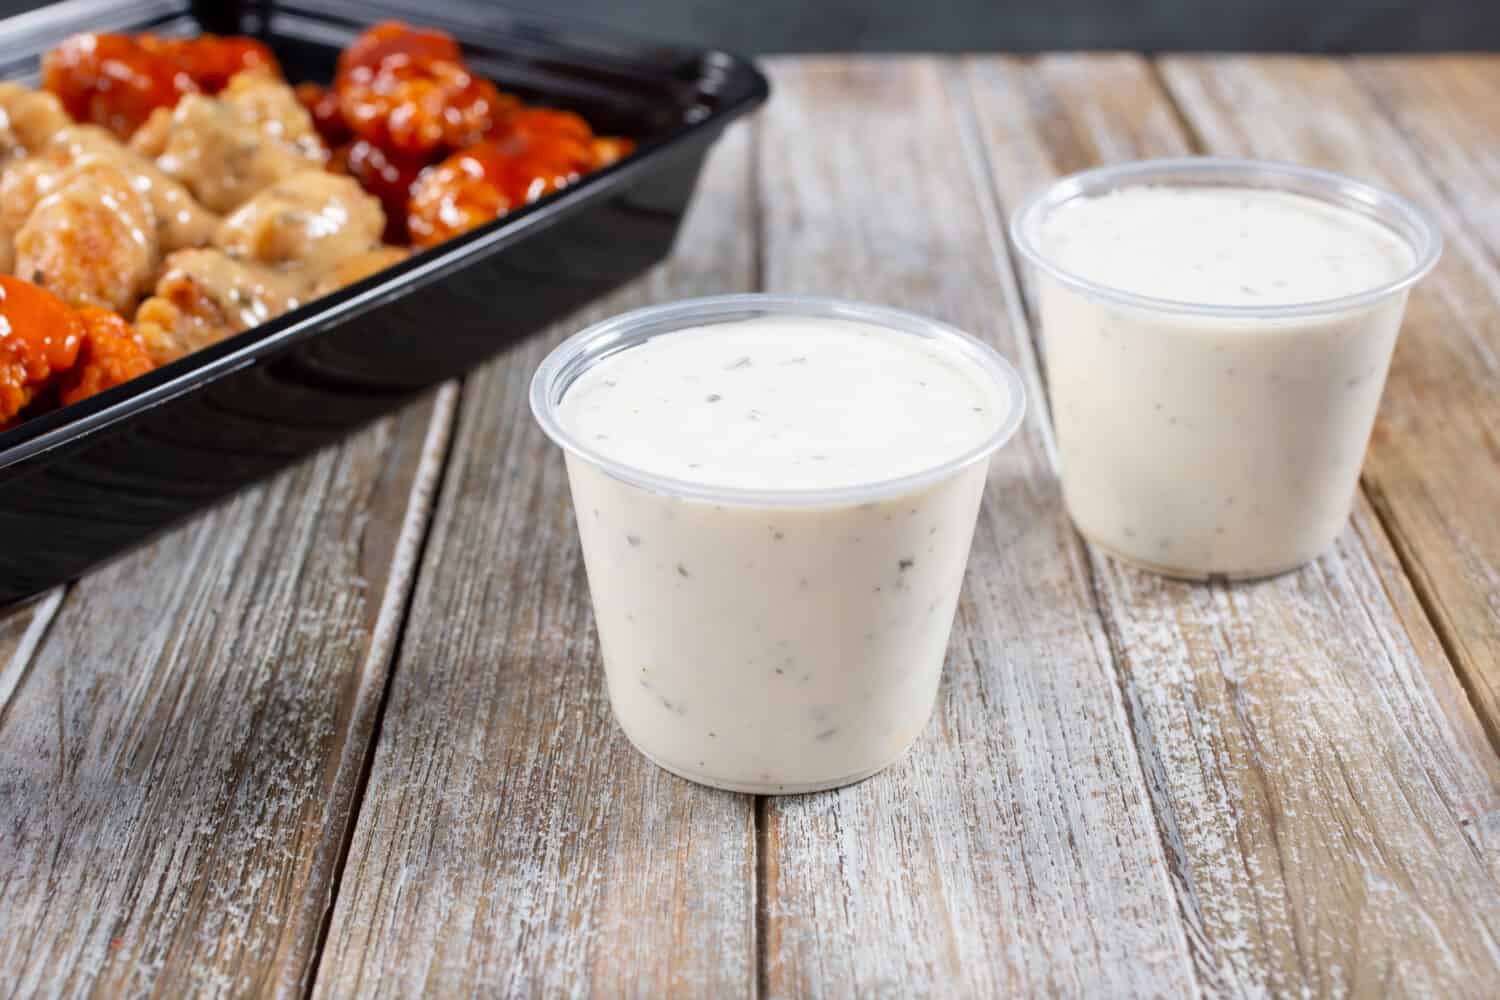 A view of ranch dressing condiment cups.